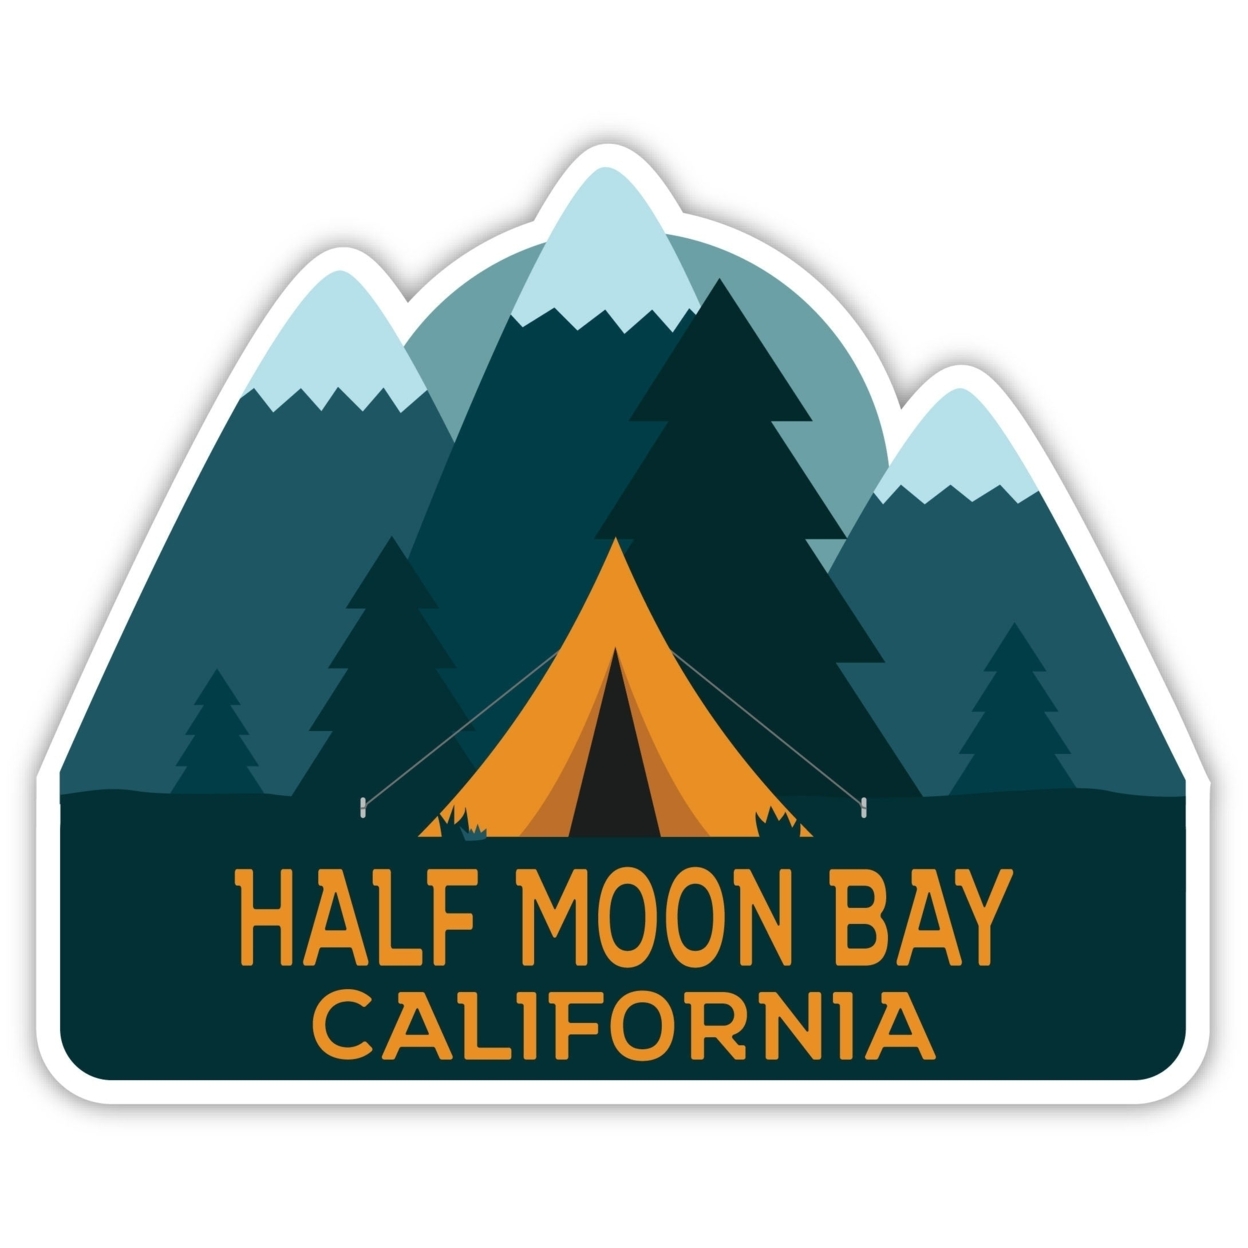 Half Moon Bay California Souvenir Decorative Stickers (Choose Theme And Size) - 4-Pack, 2-Inch, Tent